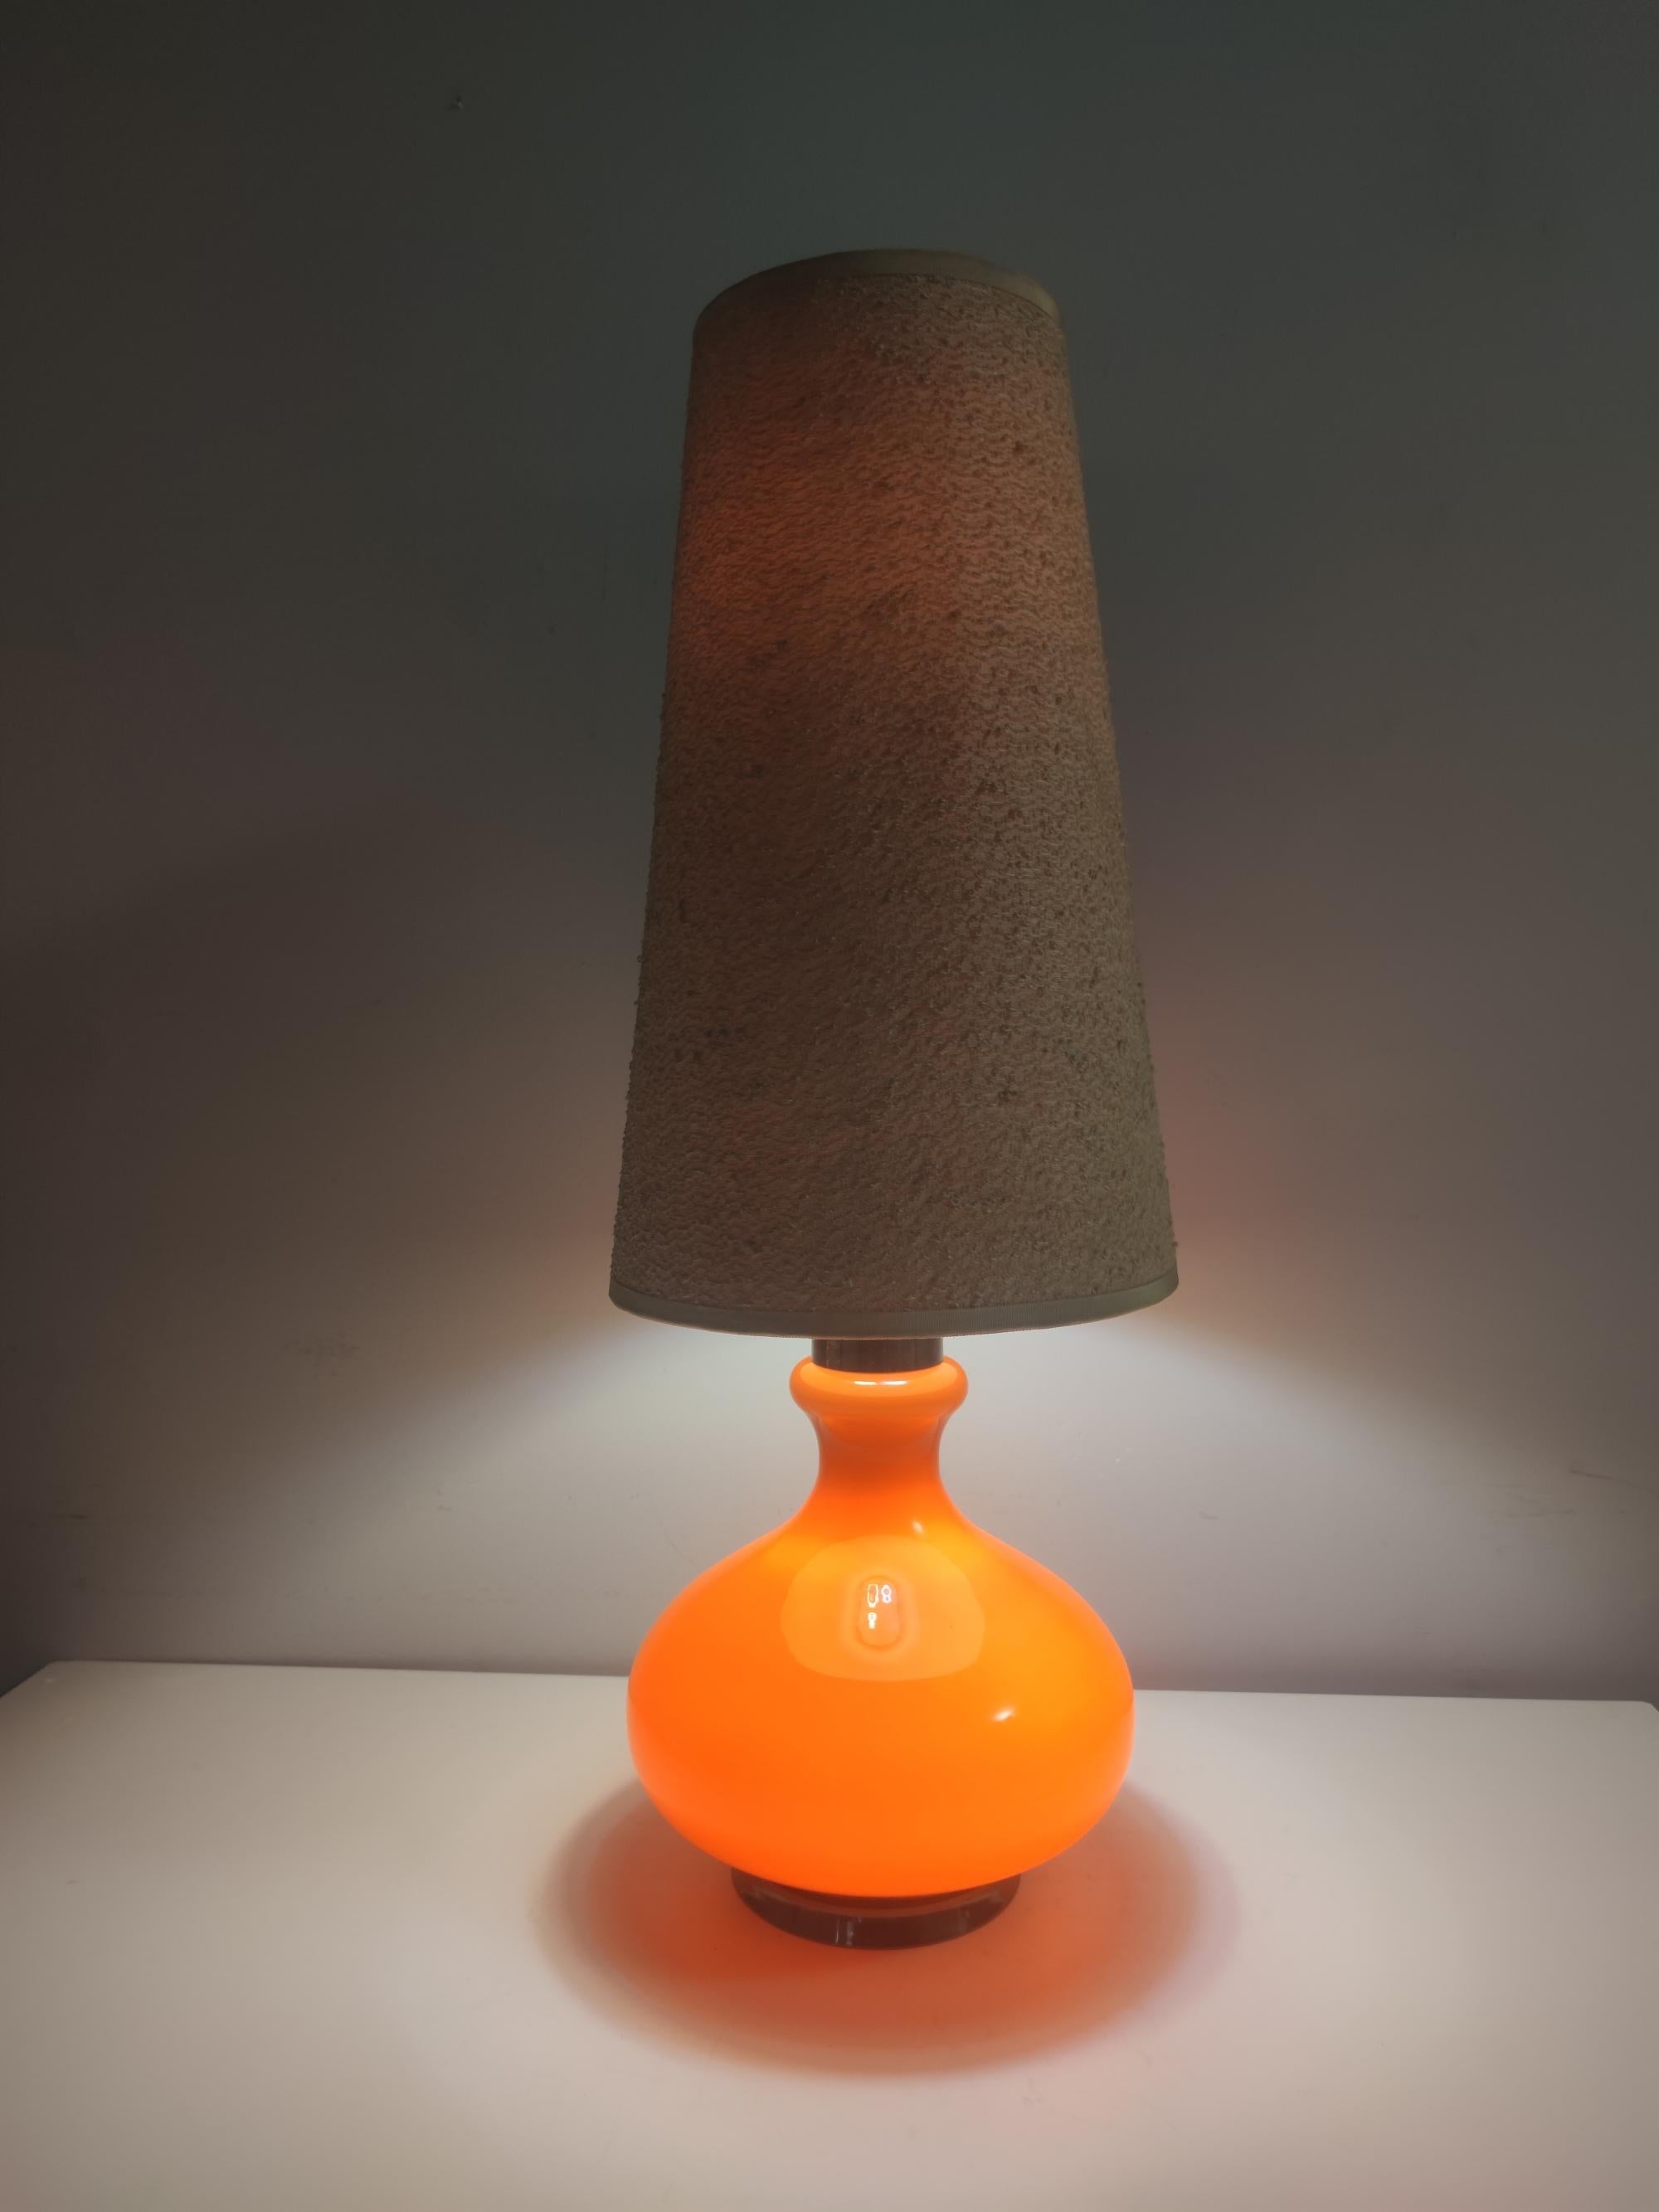 Made in Italy, 1970s.
The lamp features chrome-plated metallic elements, multi-layered encased and blown glass and a fabric lampshade, which is original from the 70s. 
The wiring is compatible with the US. 
It might show slight traces of use since